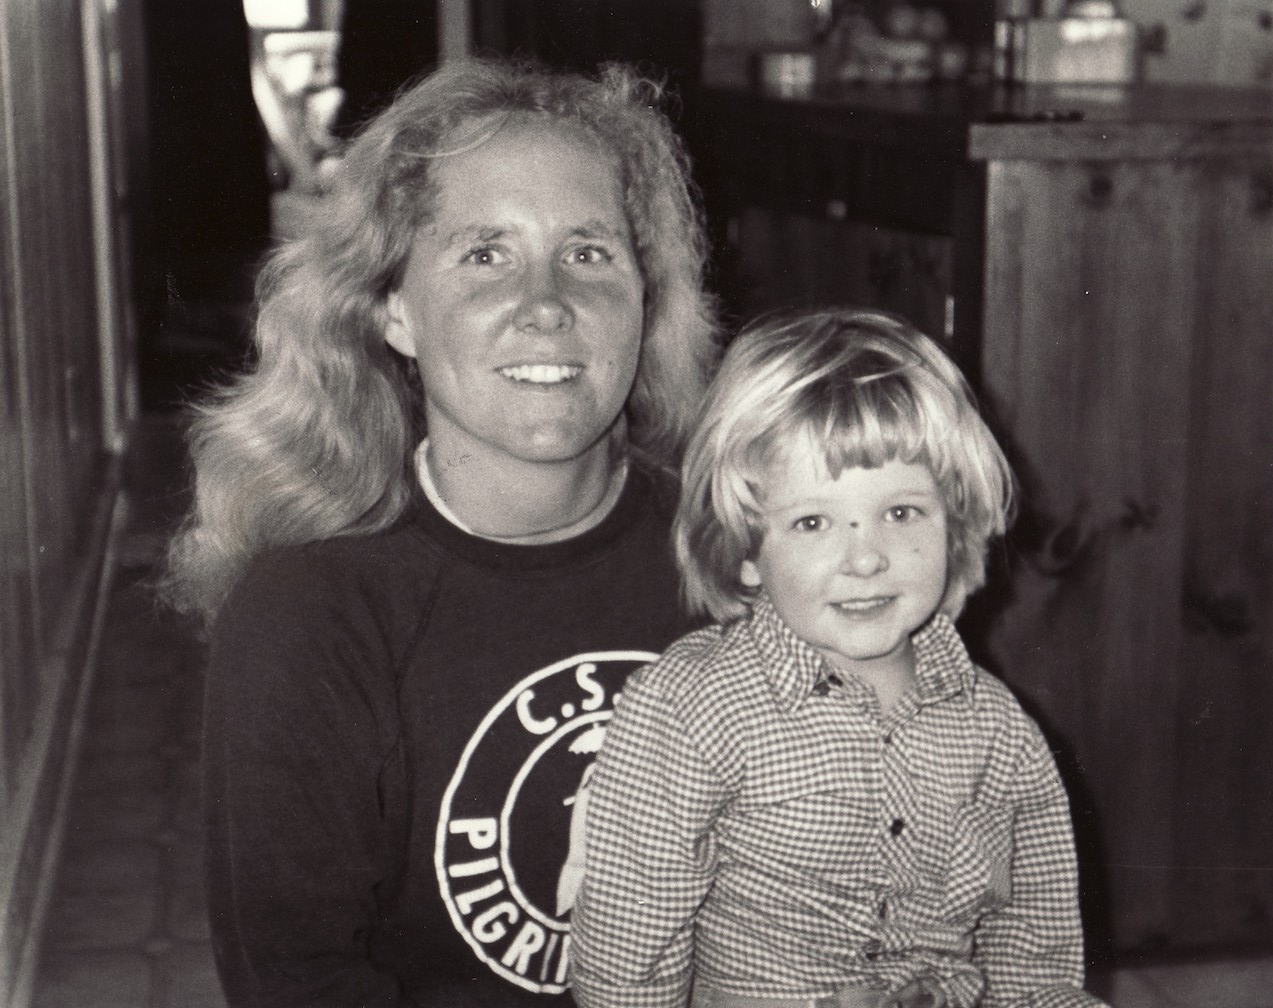 Jennifer Crossen and David Crossen (her son) at their home in Lexington, KY, 1990.